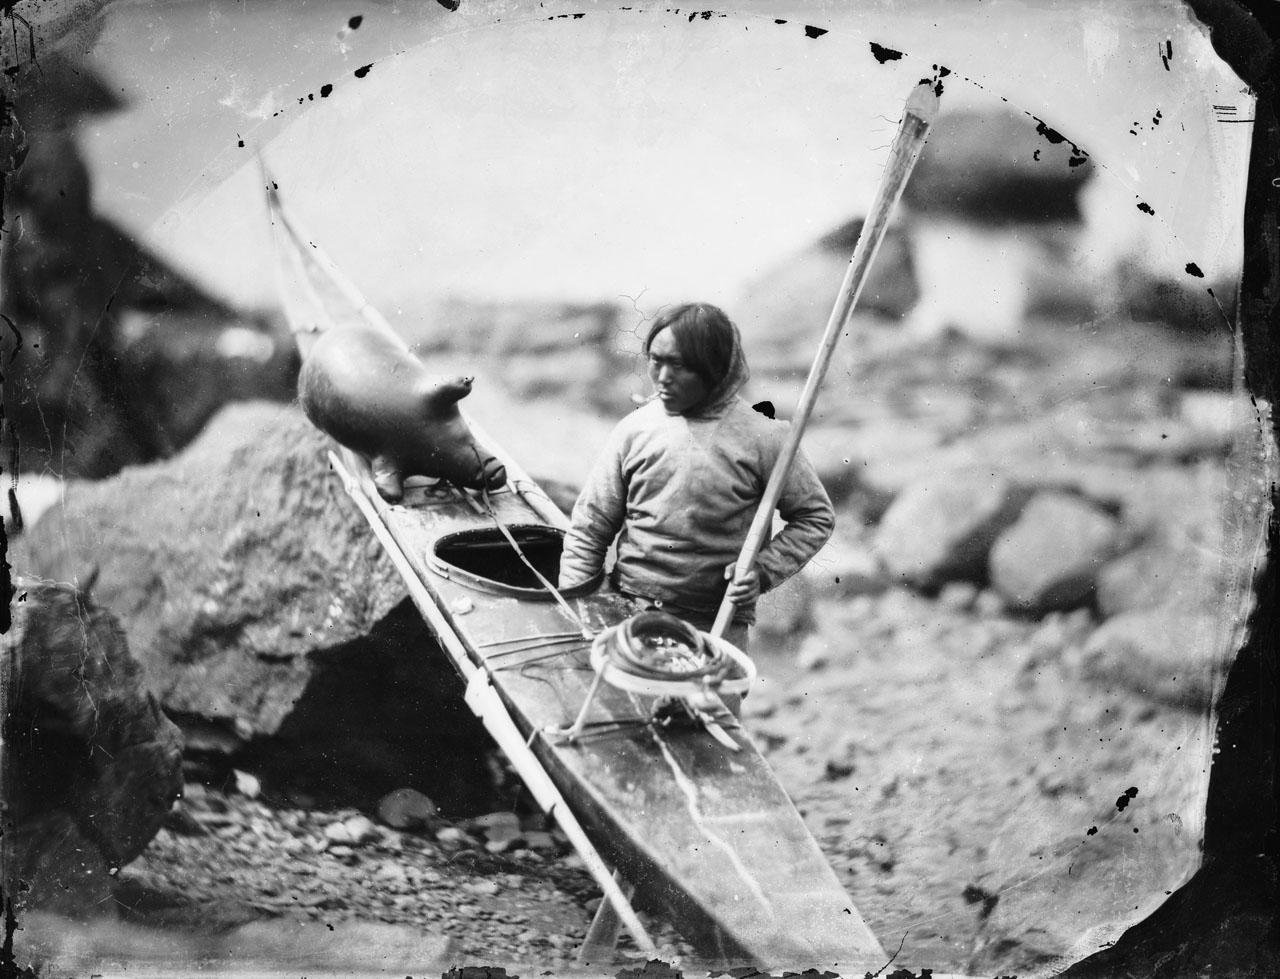 Historic black and white photograph of an Inuit man holding a kayak